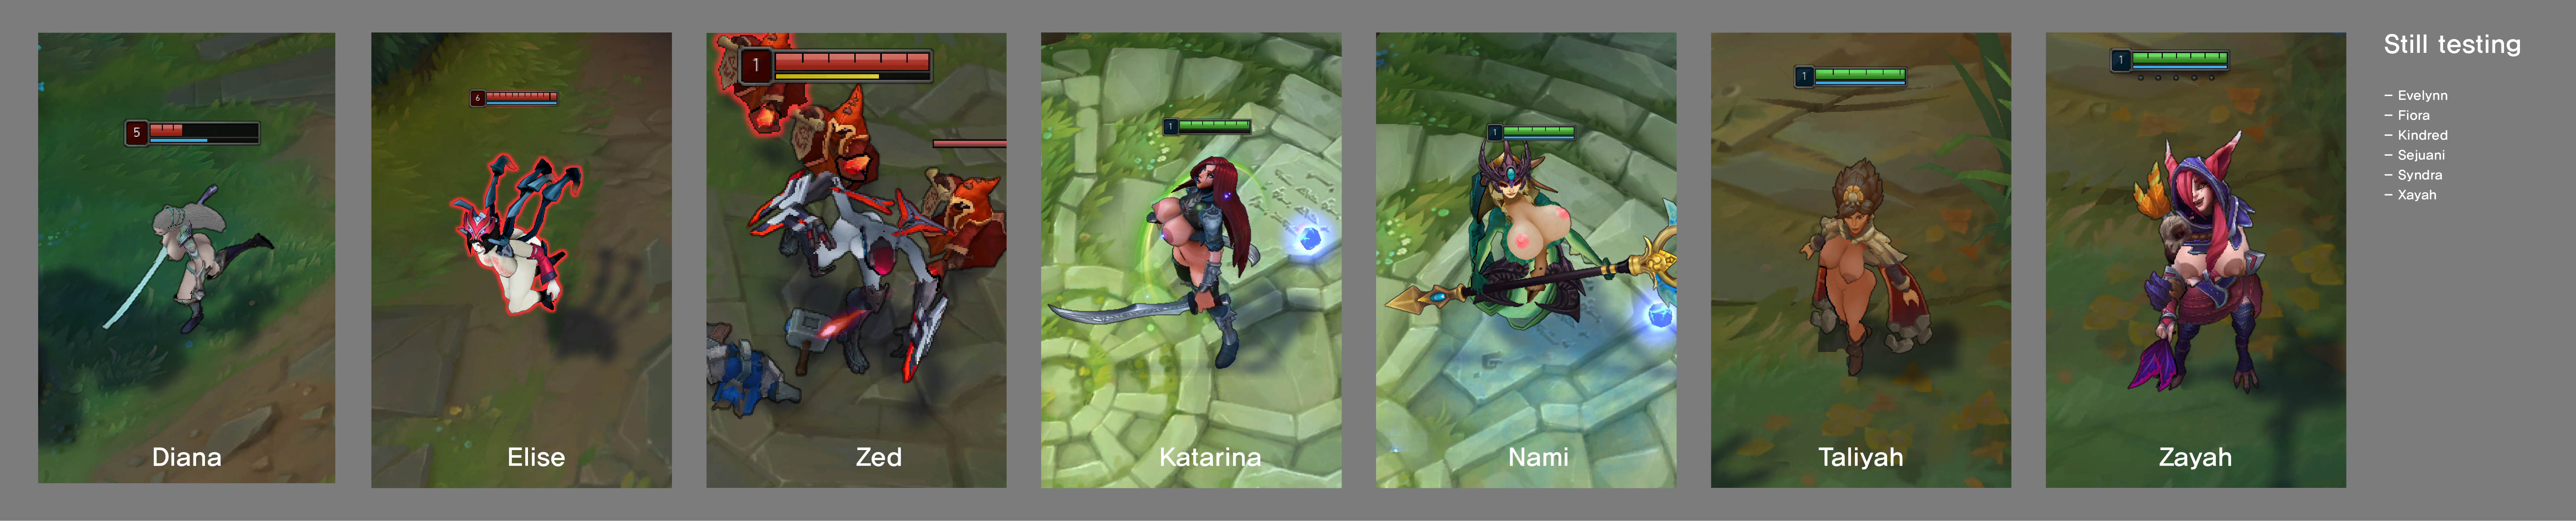 League of Legends Beauties Bare All by Way of Nude Mod.